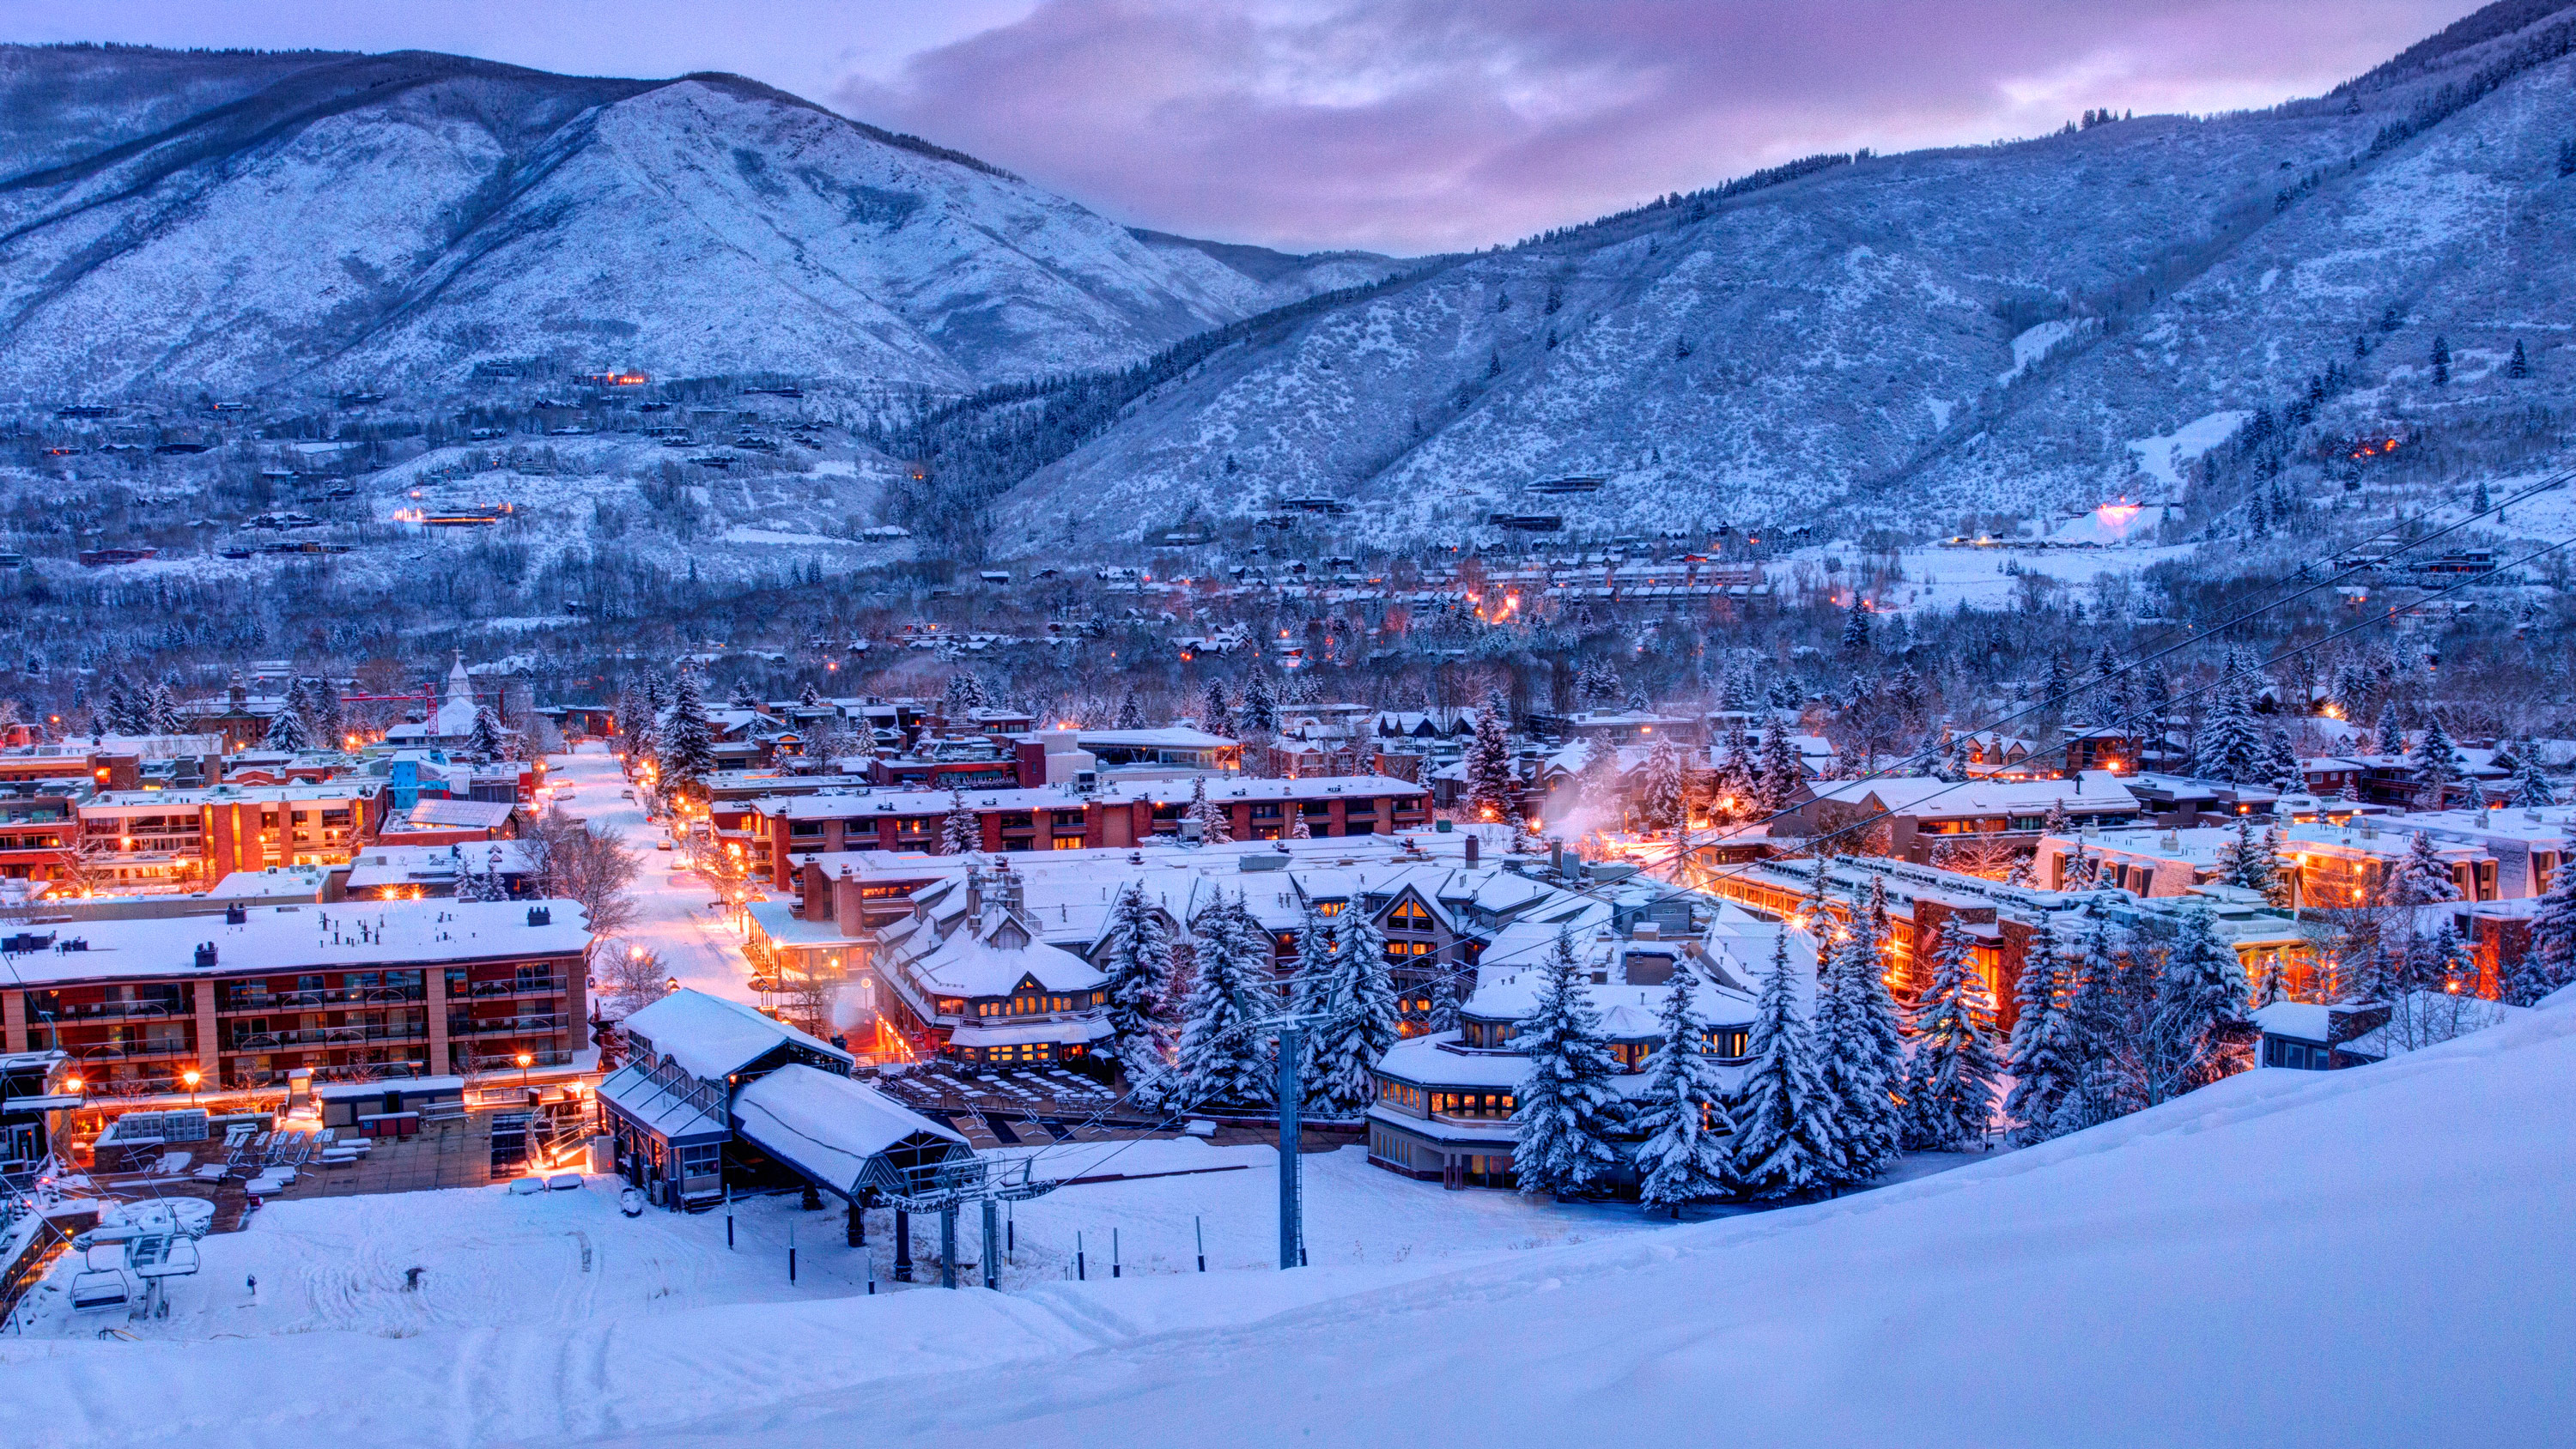 Aspen for non-skiers: Everything else you can do | CNN Travel